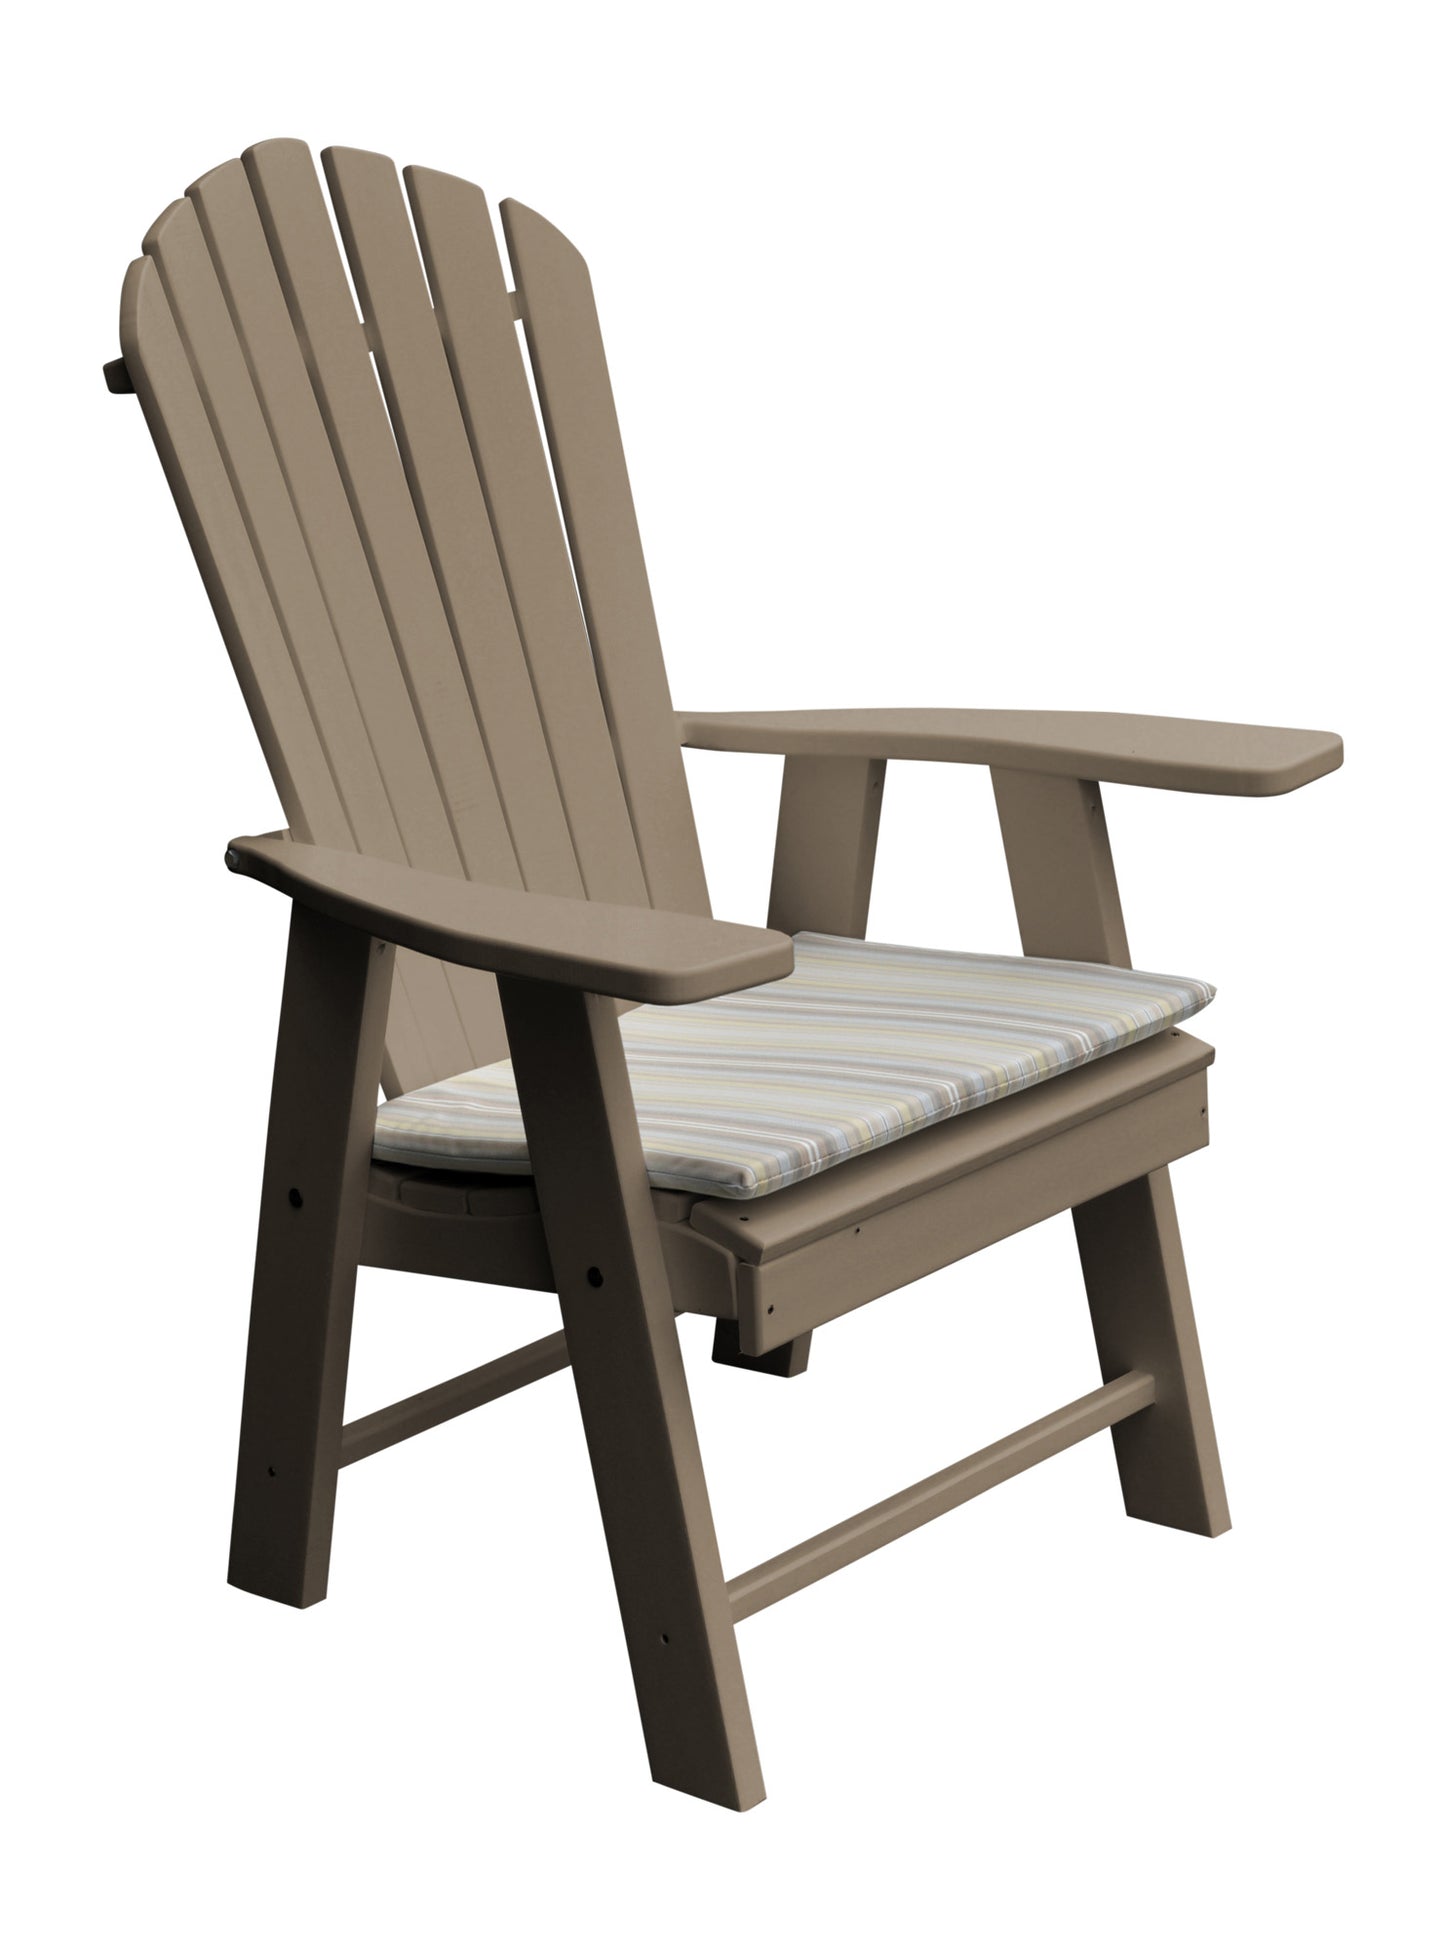 a&l recycled plastic upright adirondack chair weathered wood with seat cushion